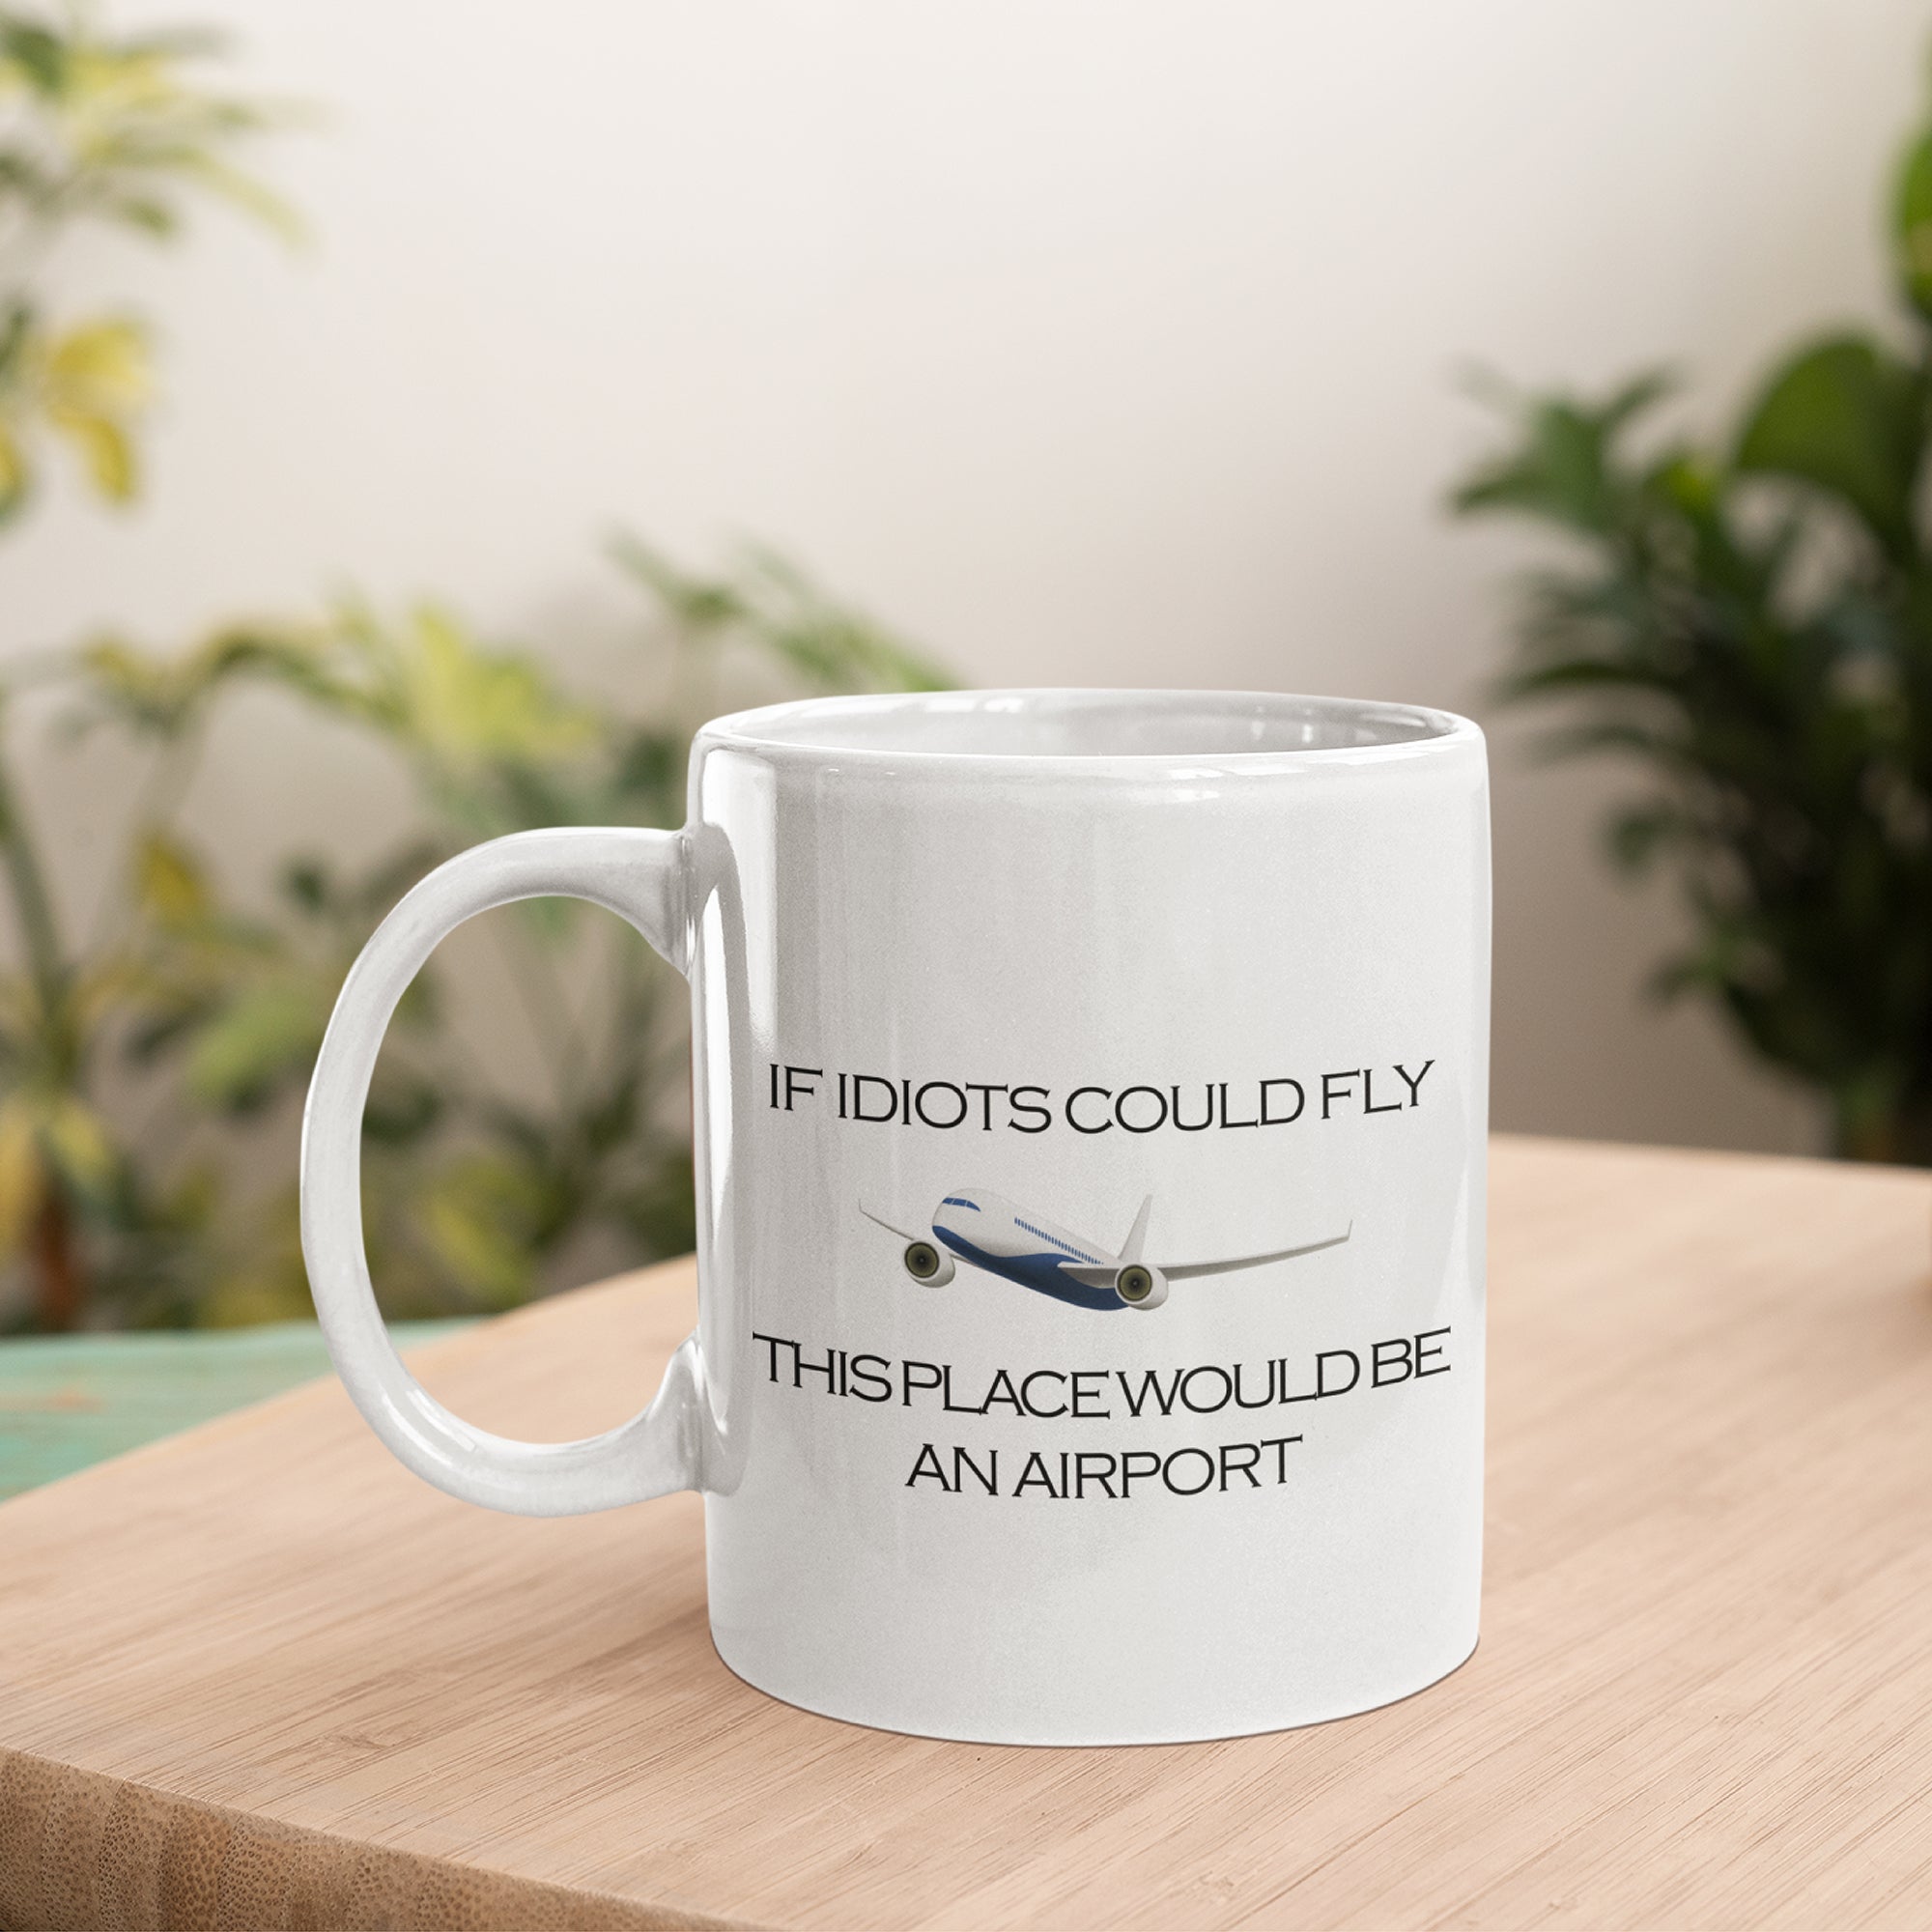 If Idiots Could Fly Funny Coffee Mug